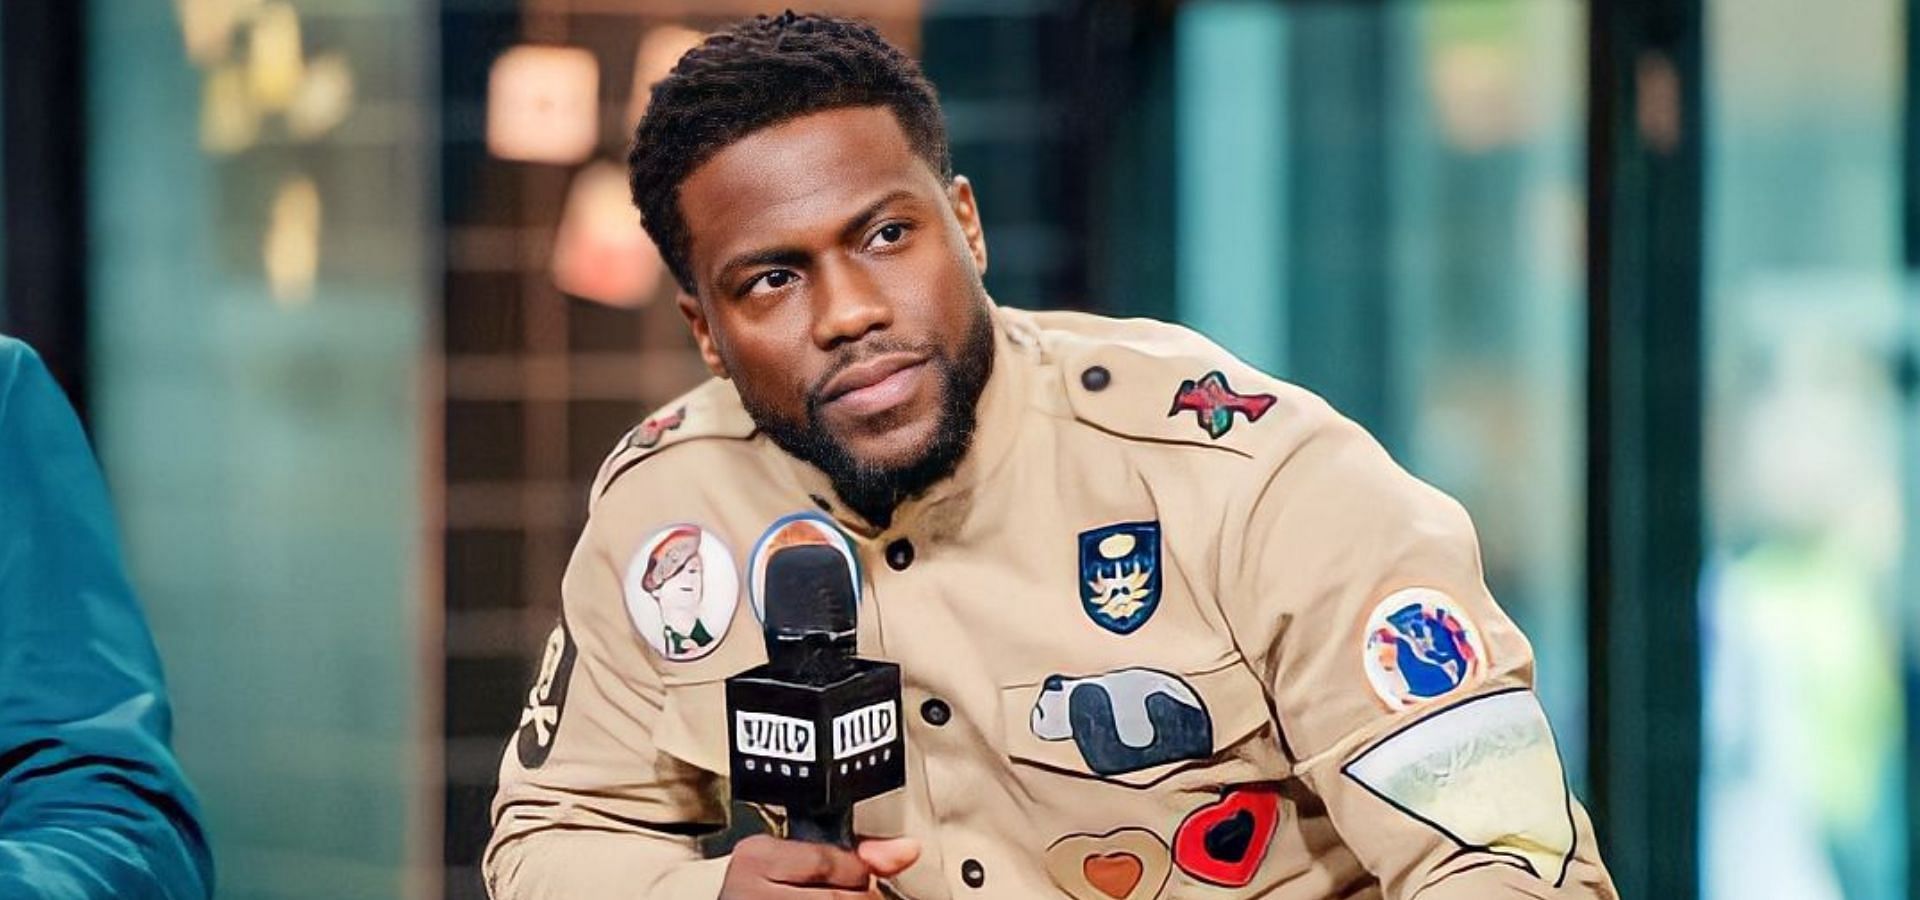 Kevin Hart Reality Check Tour 2023 Tickets, presale, dates, venues & more